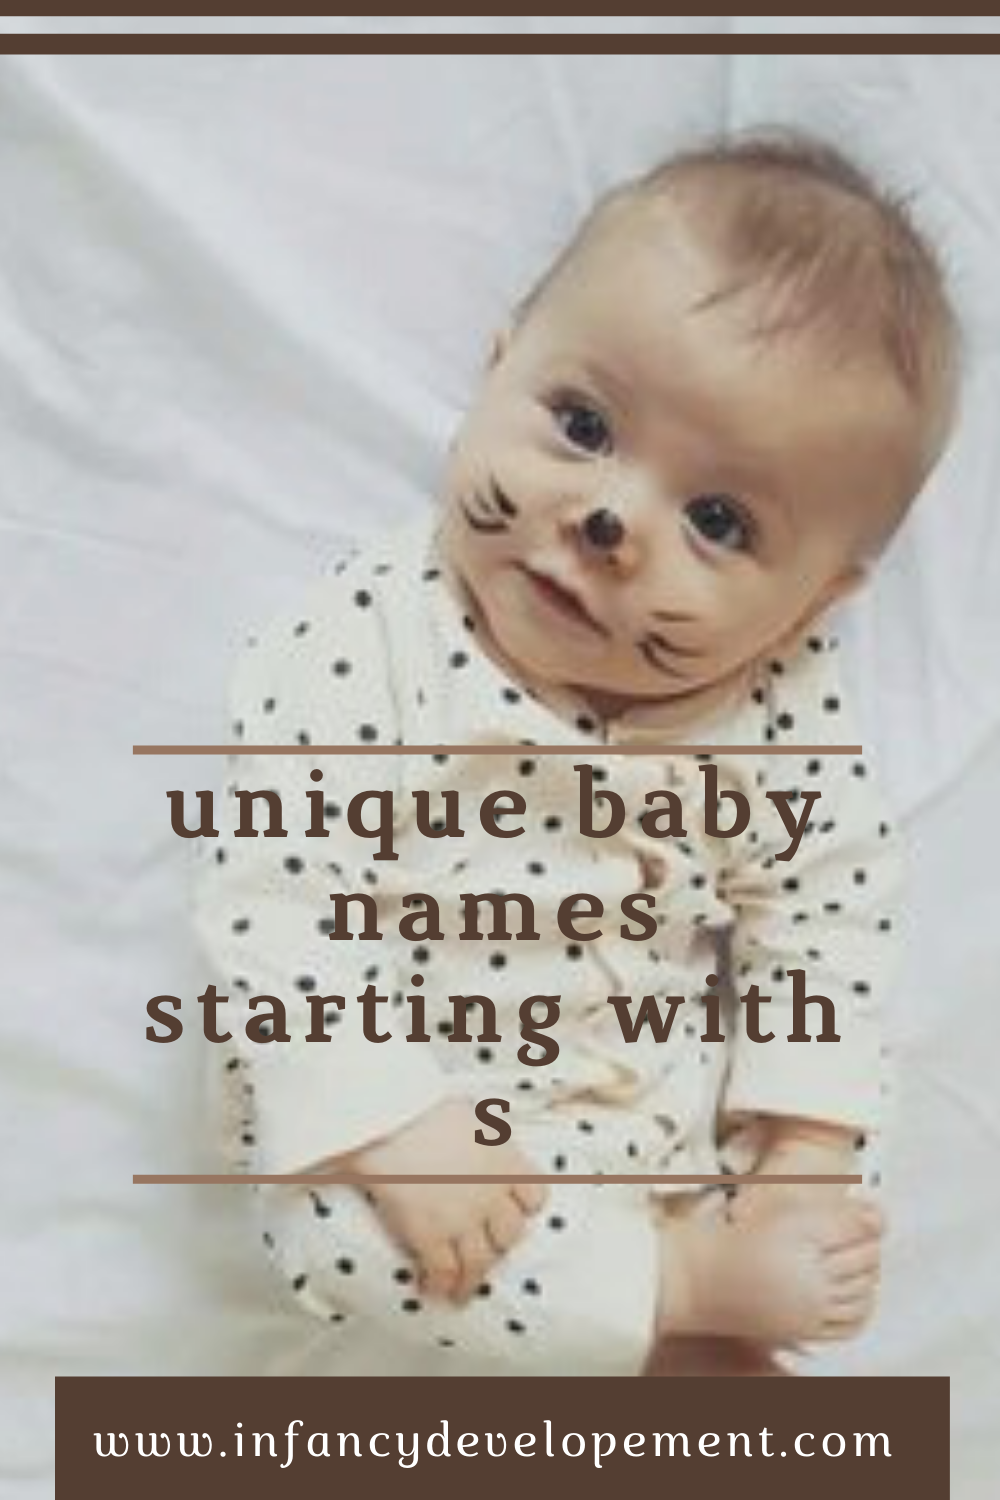 50 Unique Baby Boy Names Starting With "S"